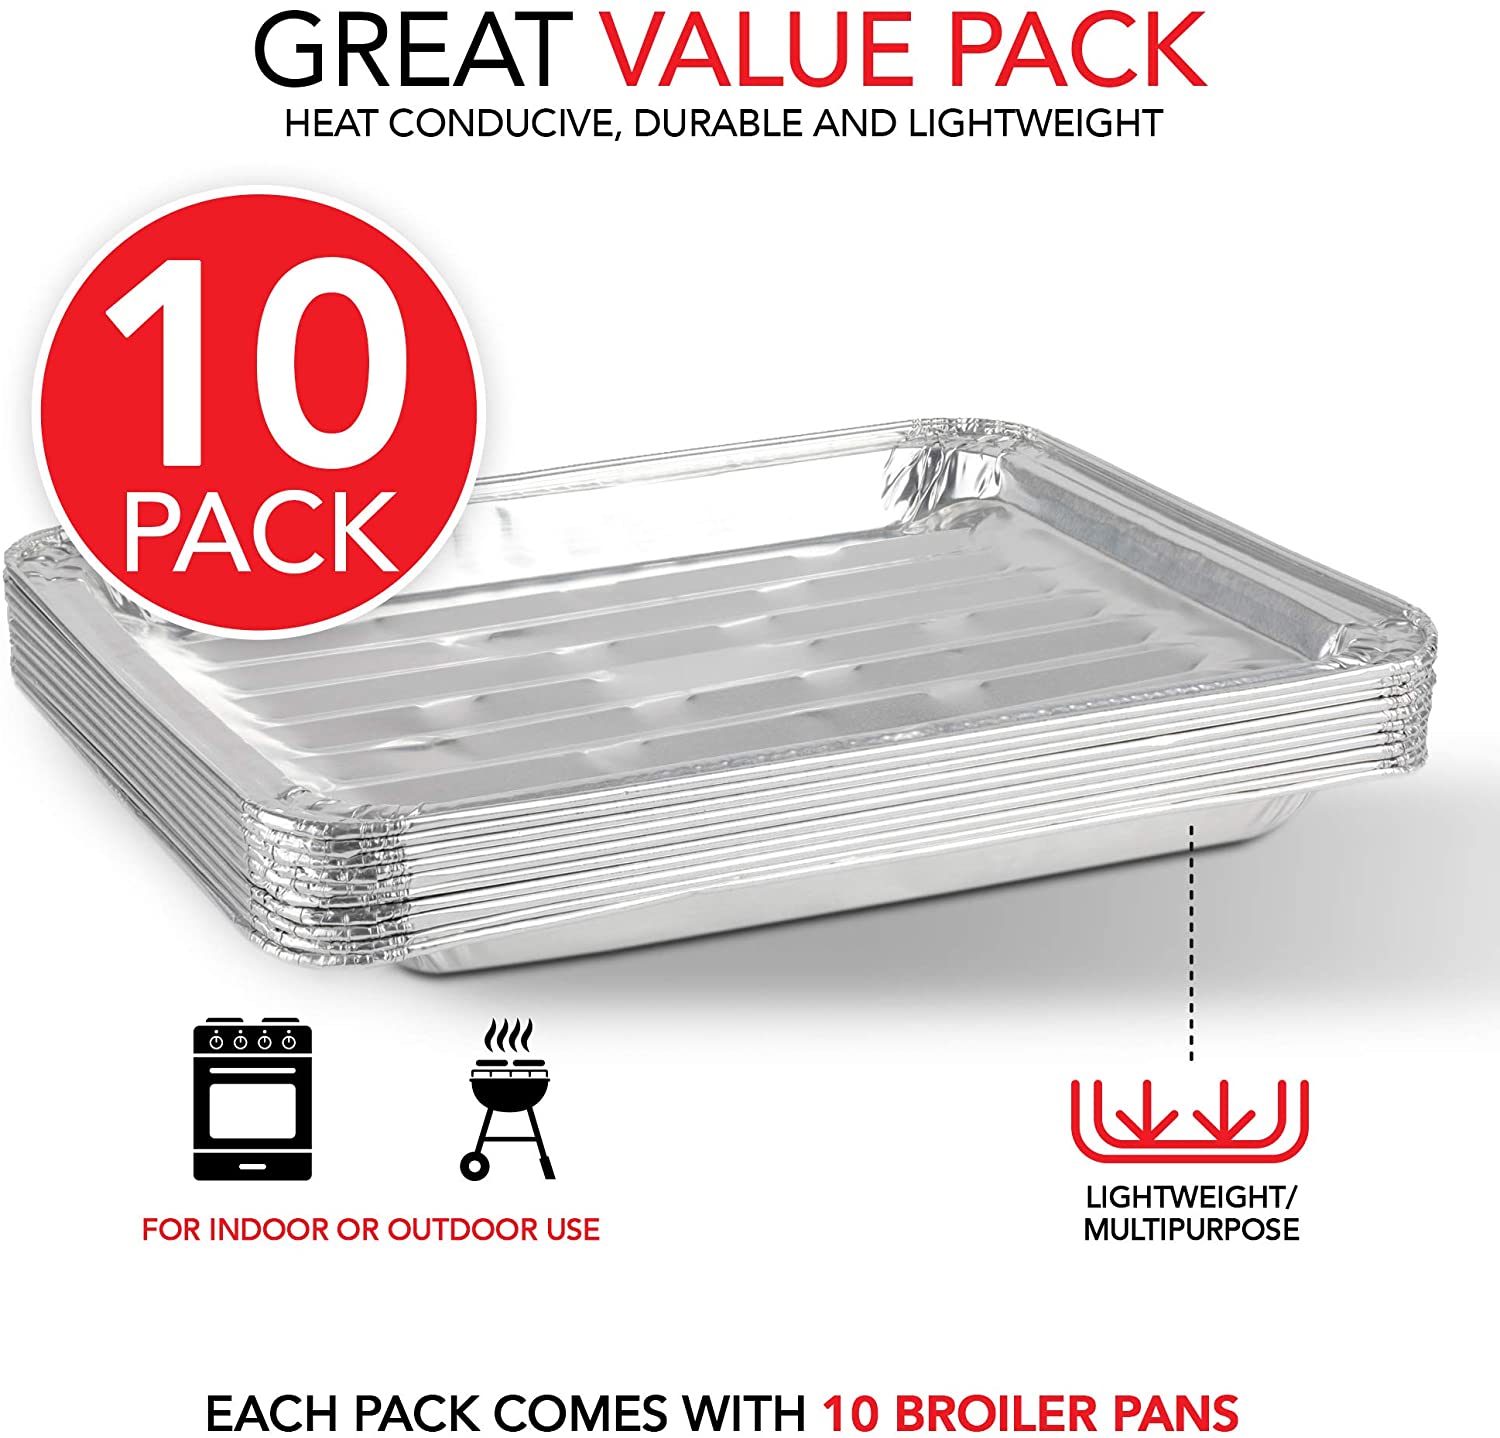 Disposable Square 8x8 Aluminum Foil Storage Pans with Lids (10 Count) by Stock Your Home, Size: 10 Count w/ Lids, Silver